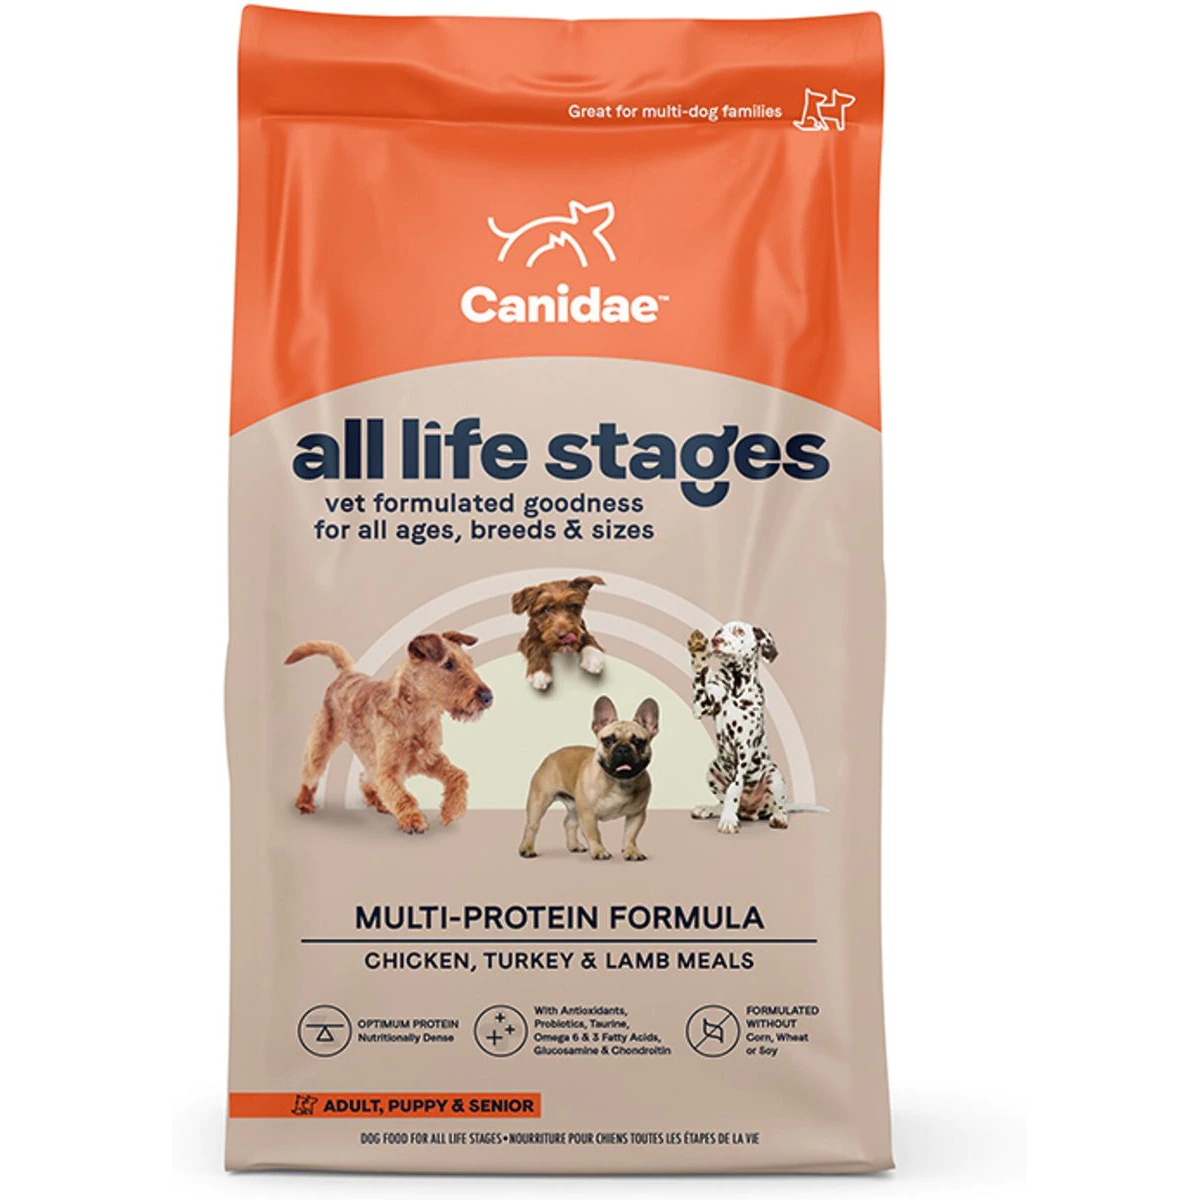 CANIDAE All Life Stages Chicken, Turkey & Lamb Formula Dry Dog Food